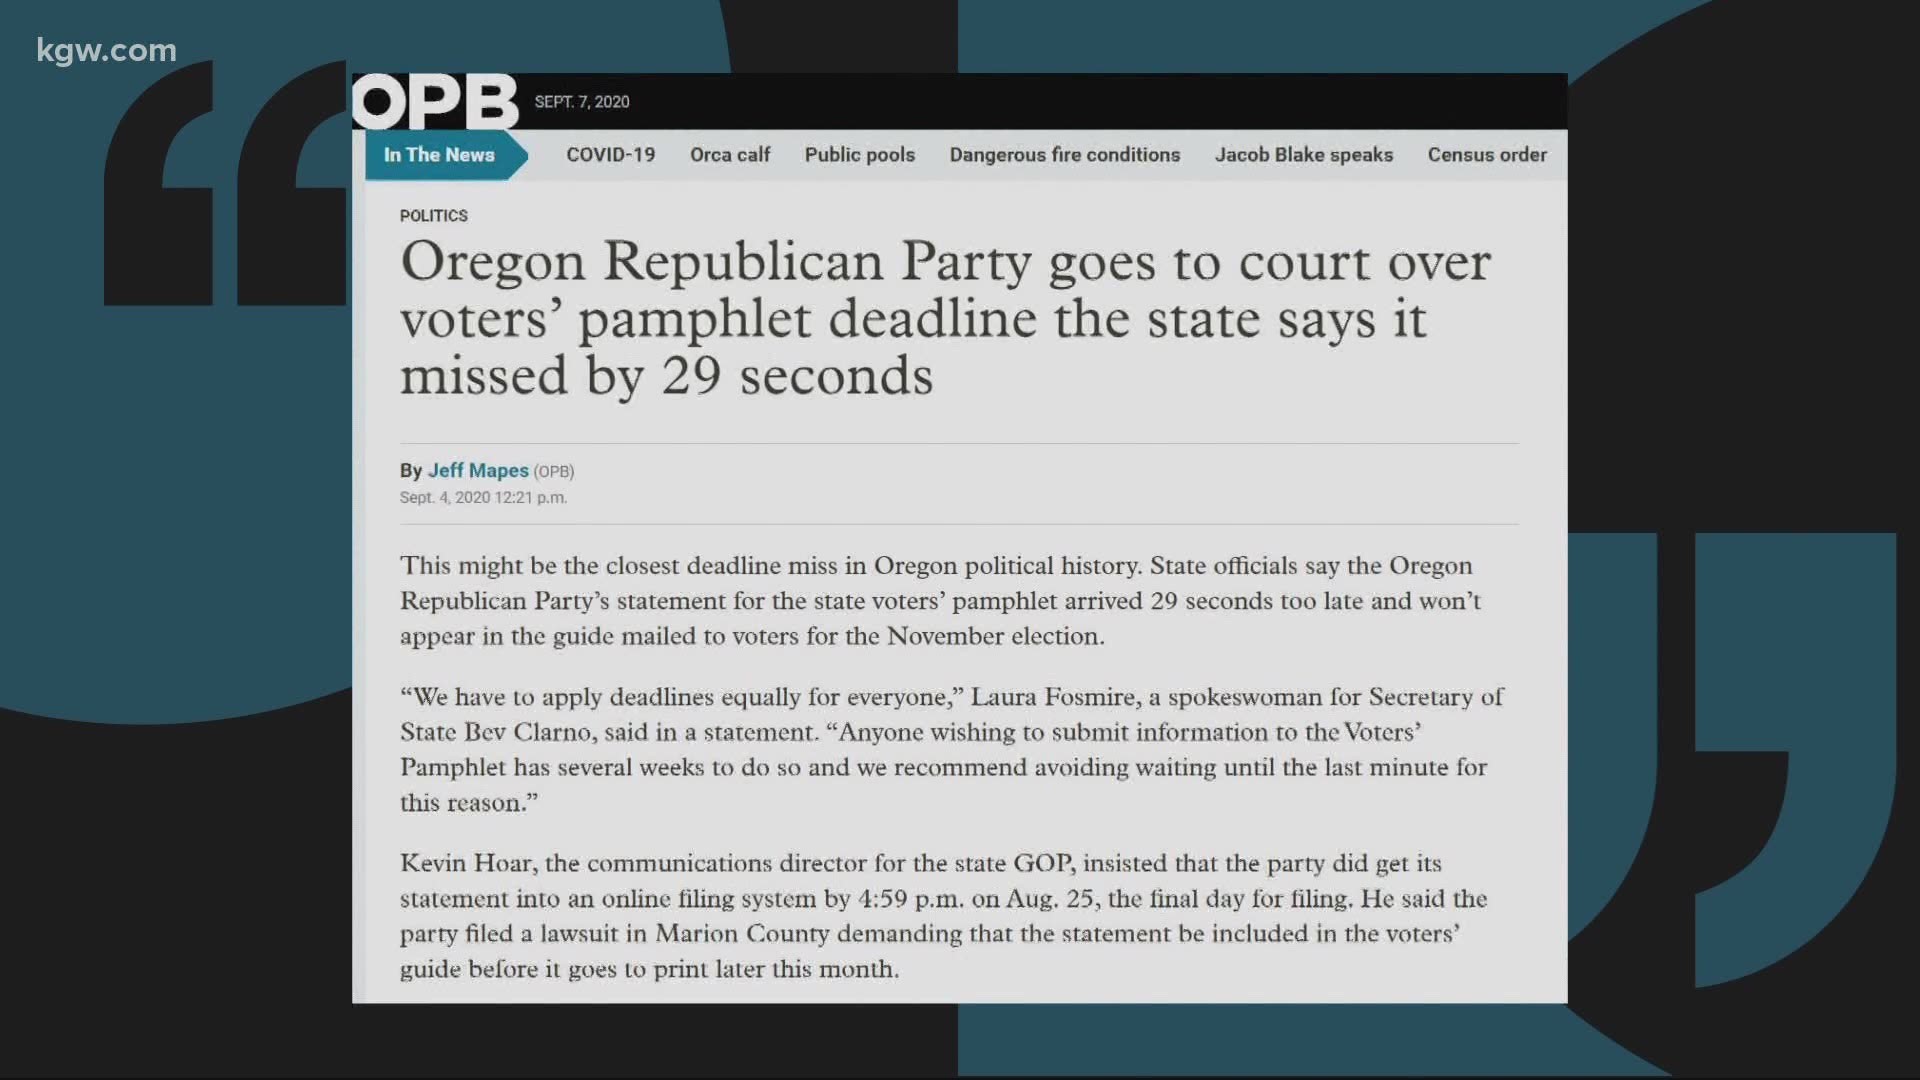 Oregon voter pamphlets will feature a g-o-p party statement after all.